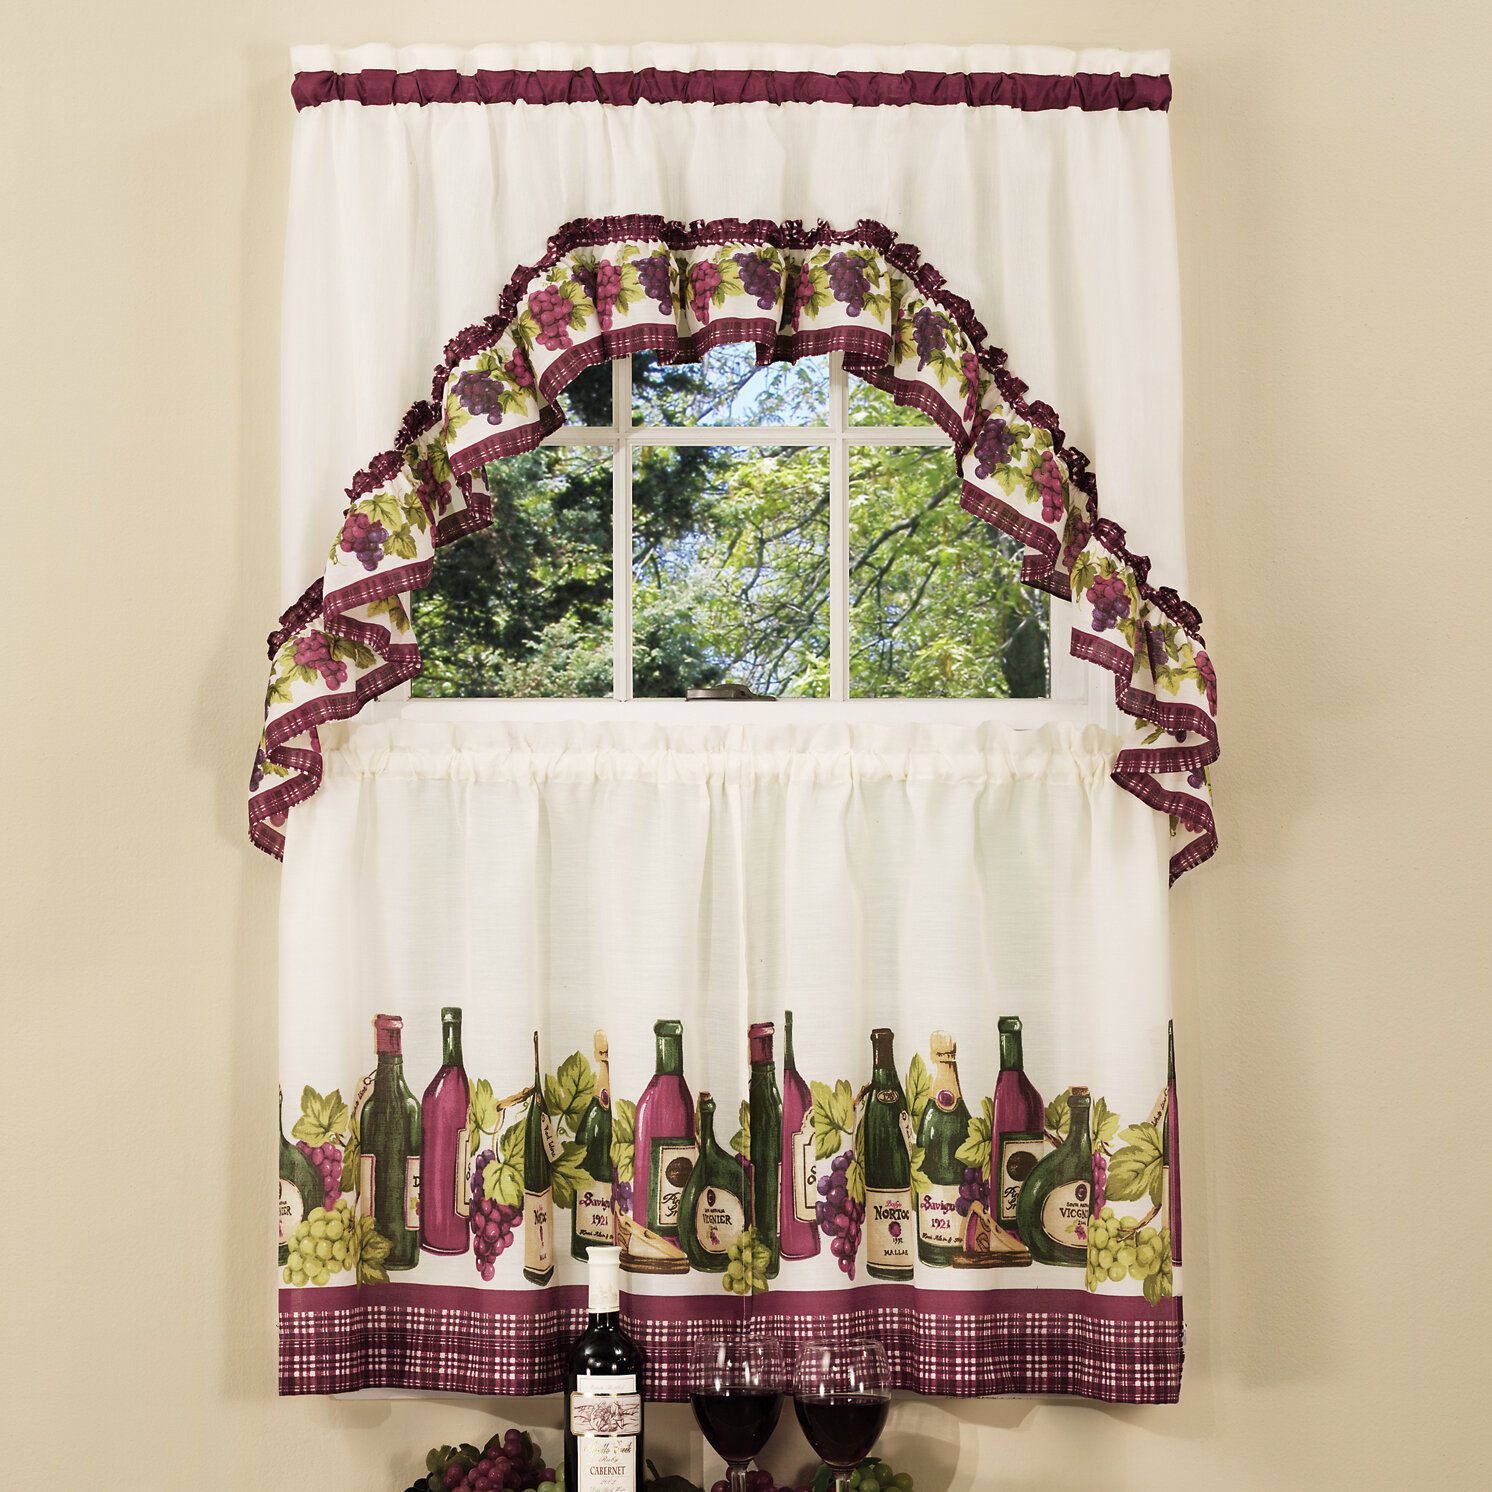 Chardonnay 57" Kitchen Curtain In Window Curtains Sets With Colorful Marketplace Vegetable And Sunflower Print (Photo 9 of 20)